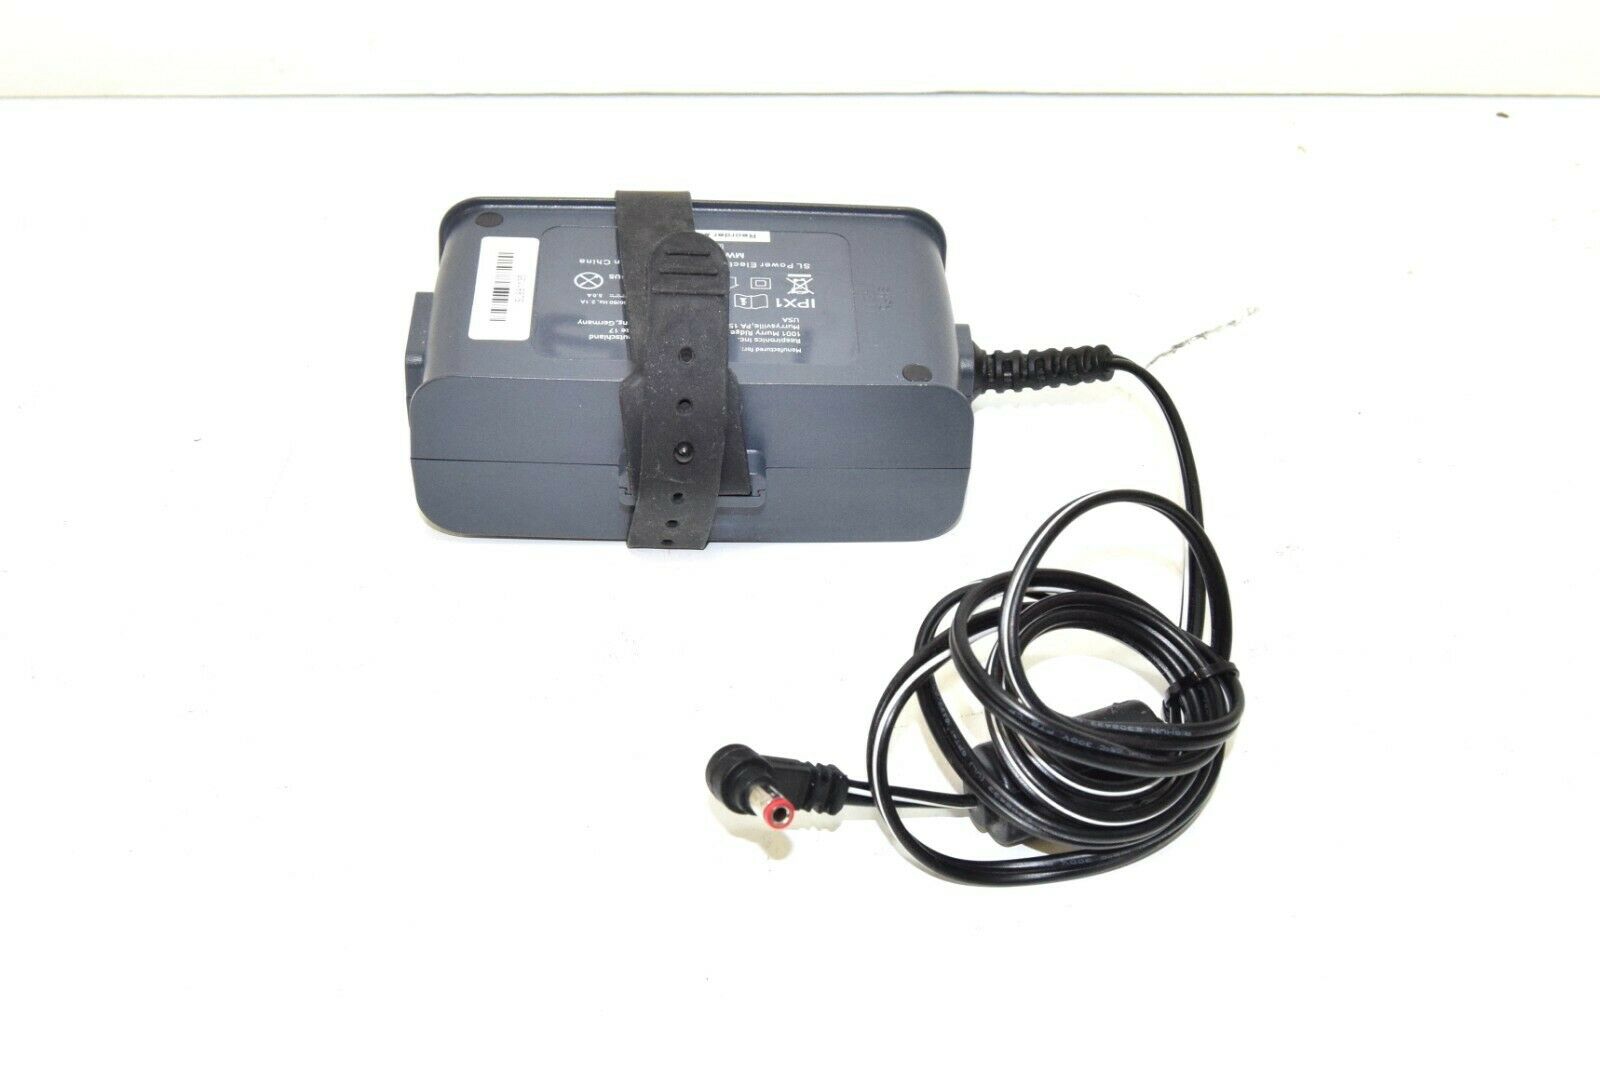 Adapter For Respironics 12V AC Adapter Ref 1058190 (Genuine Product) Compatible Brand: Respironics Type: Power Adapt